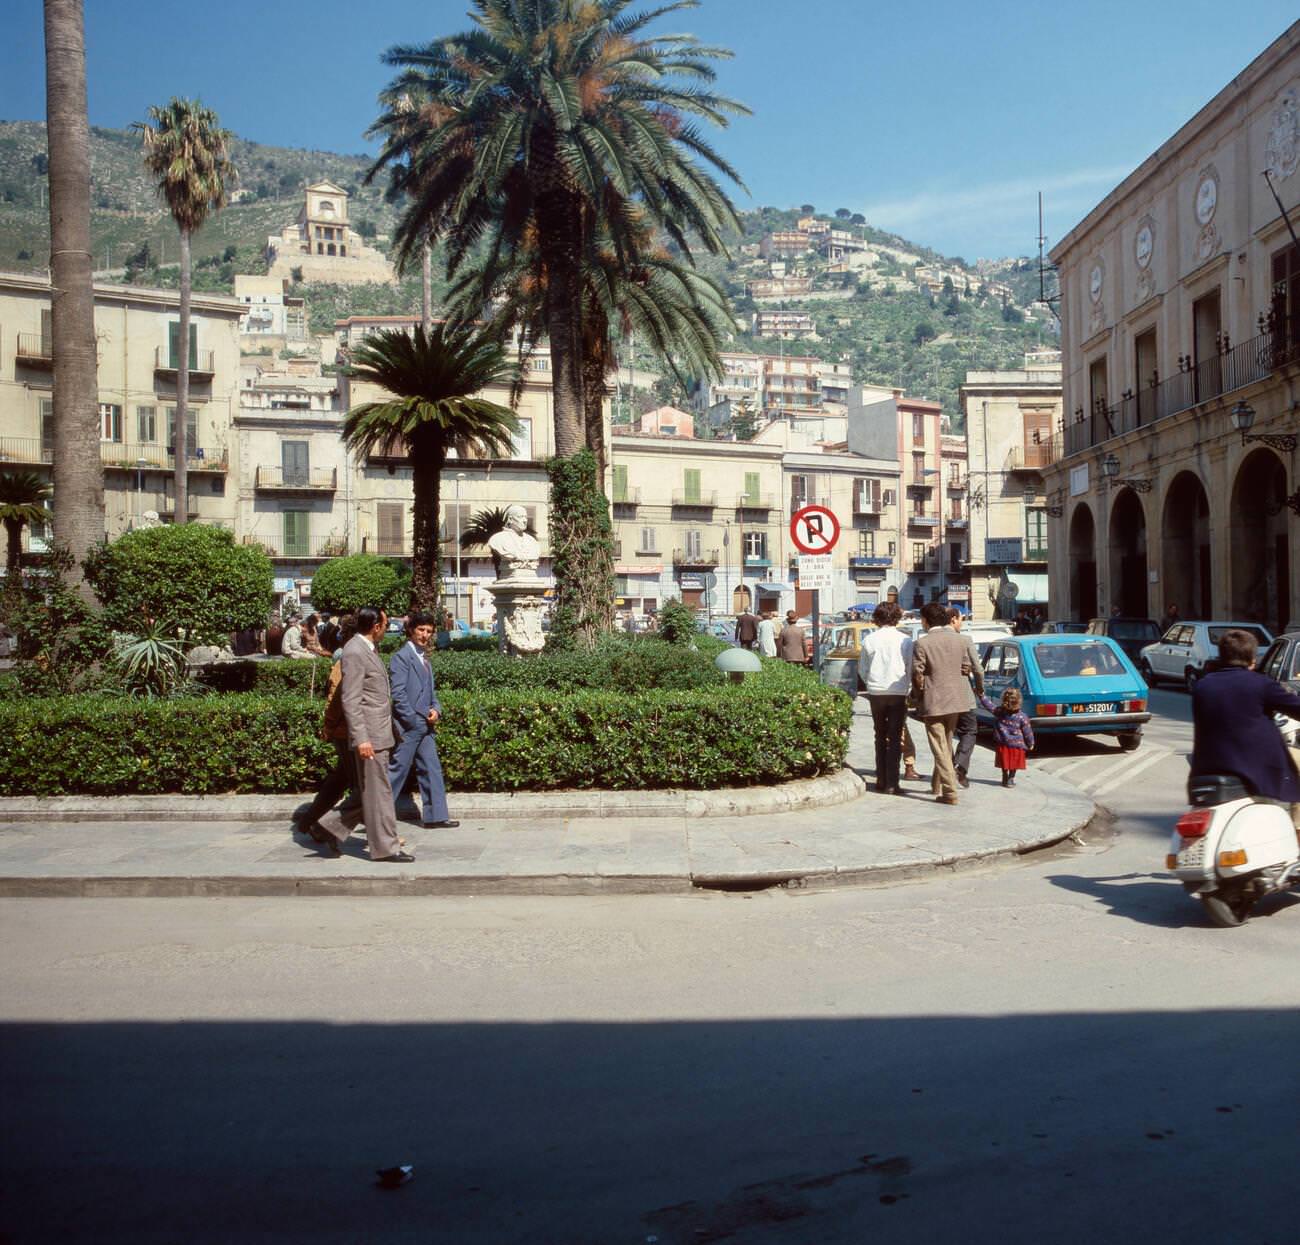 A trip to Monreale, Sicily, in the 1970s.